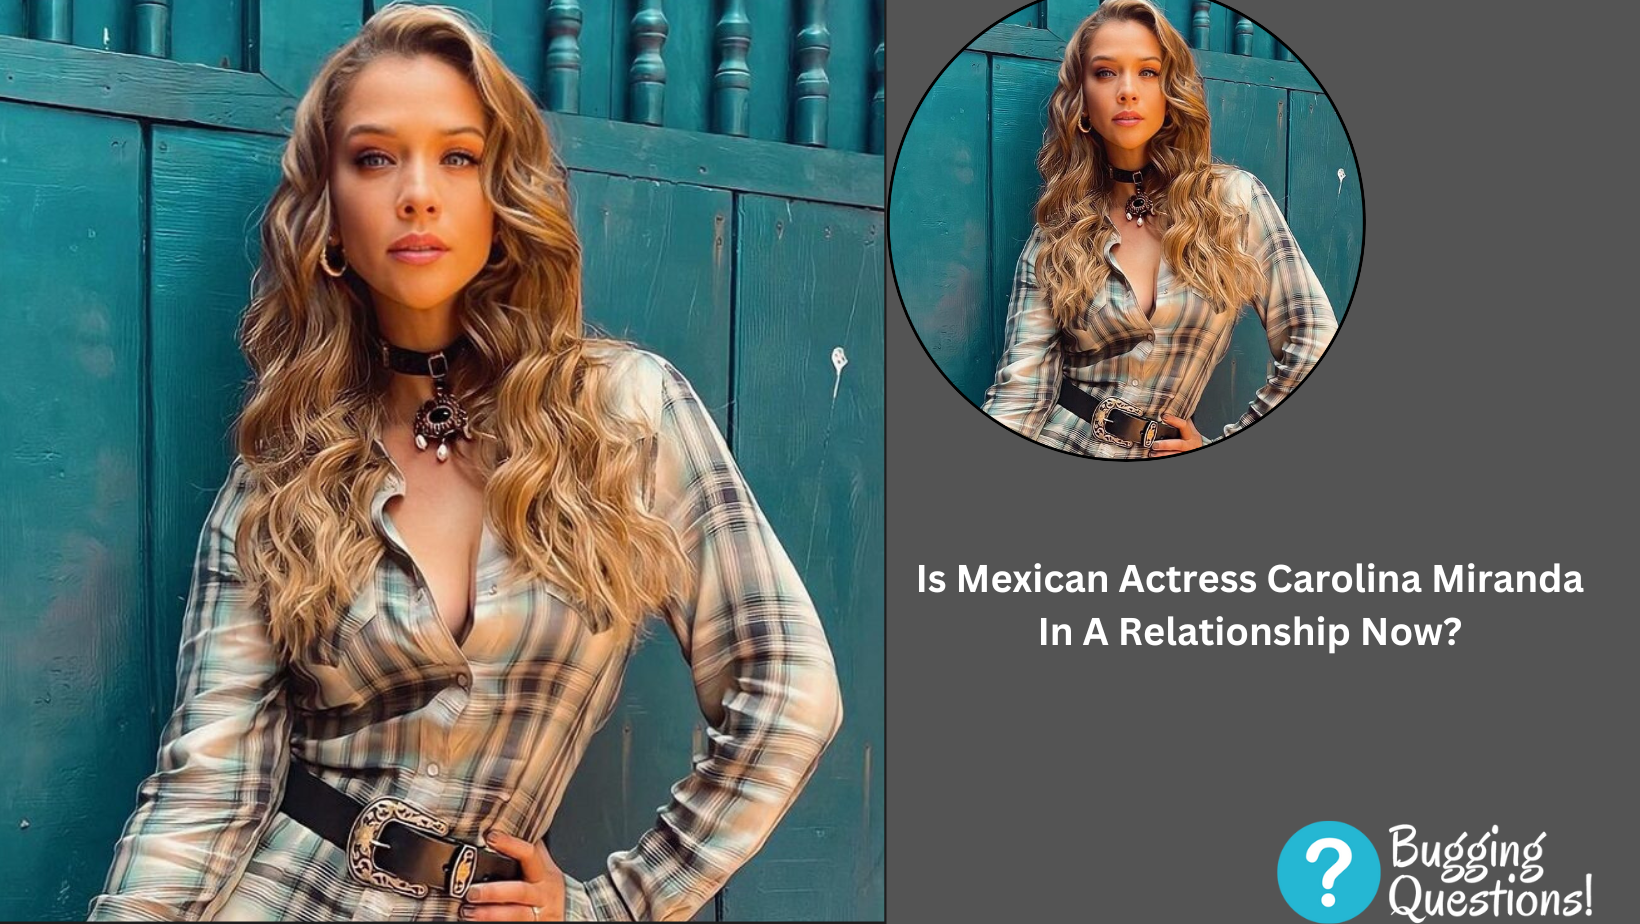 Is Mexican Actress Carolina Miranda In A Relationship Now?